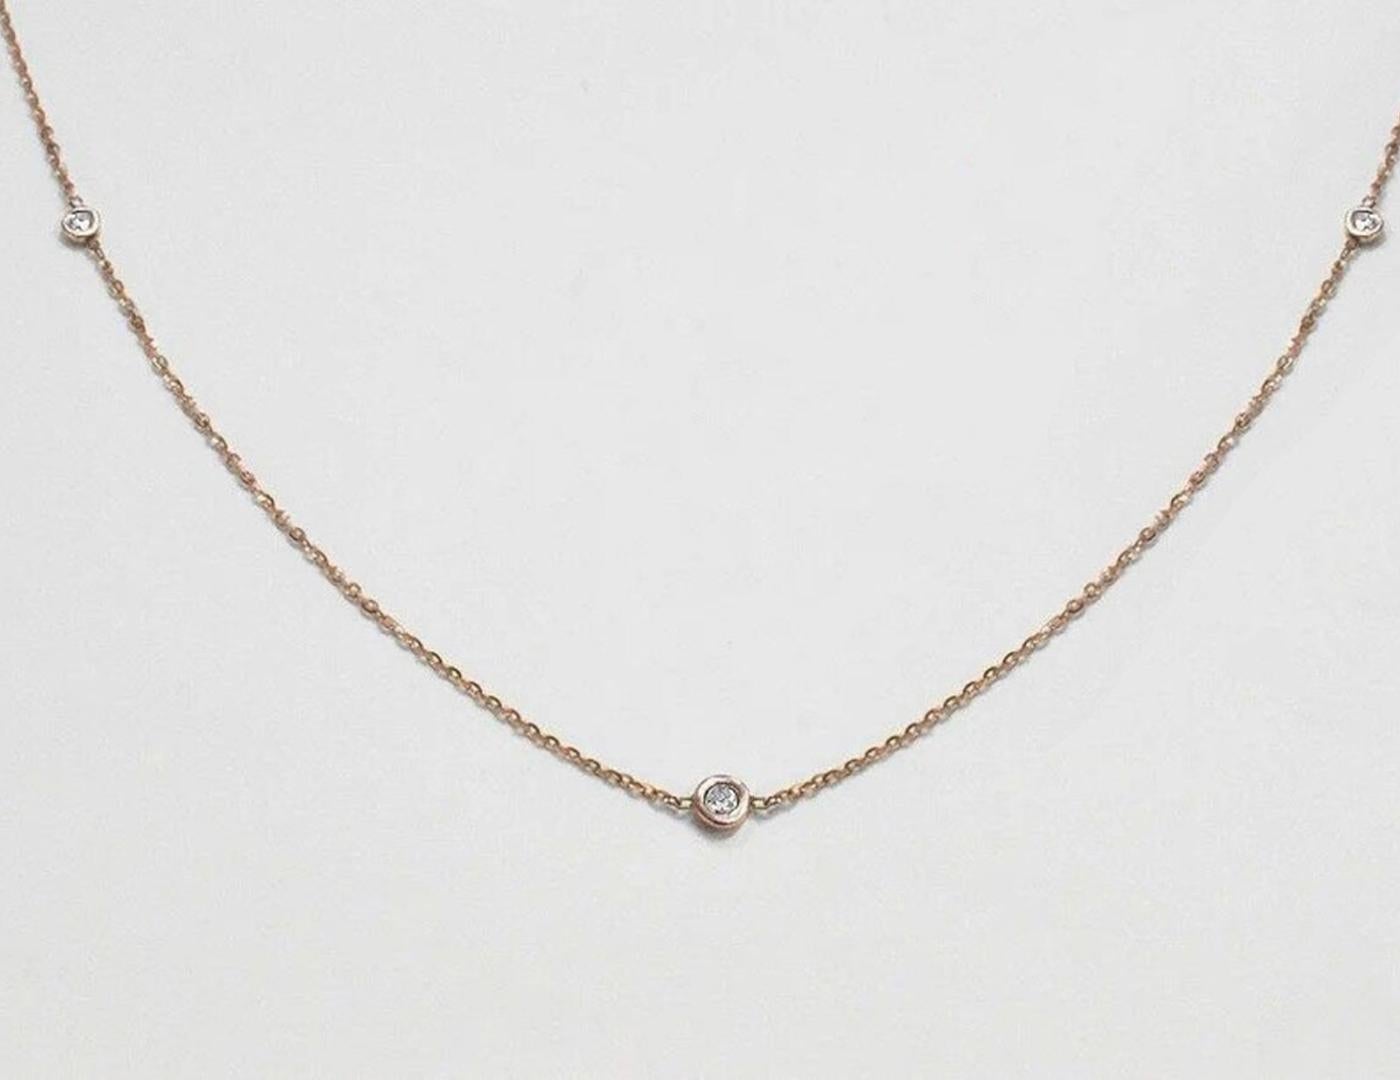 Three Diamond Station Necklace is made of 18k solid gold.
Available in three colors of gold:  Yellow Gold / White Gold / Rose Gold.

Natural genuine round cut diamond each diamond is hand selected by me to ensure quality and set by a master setter